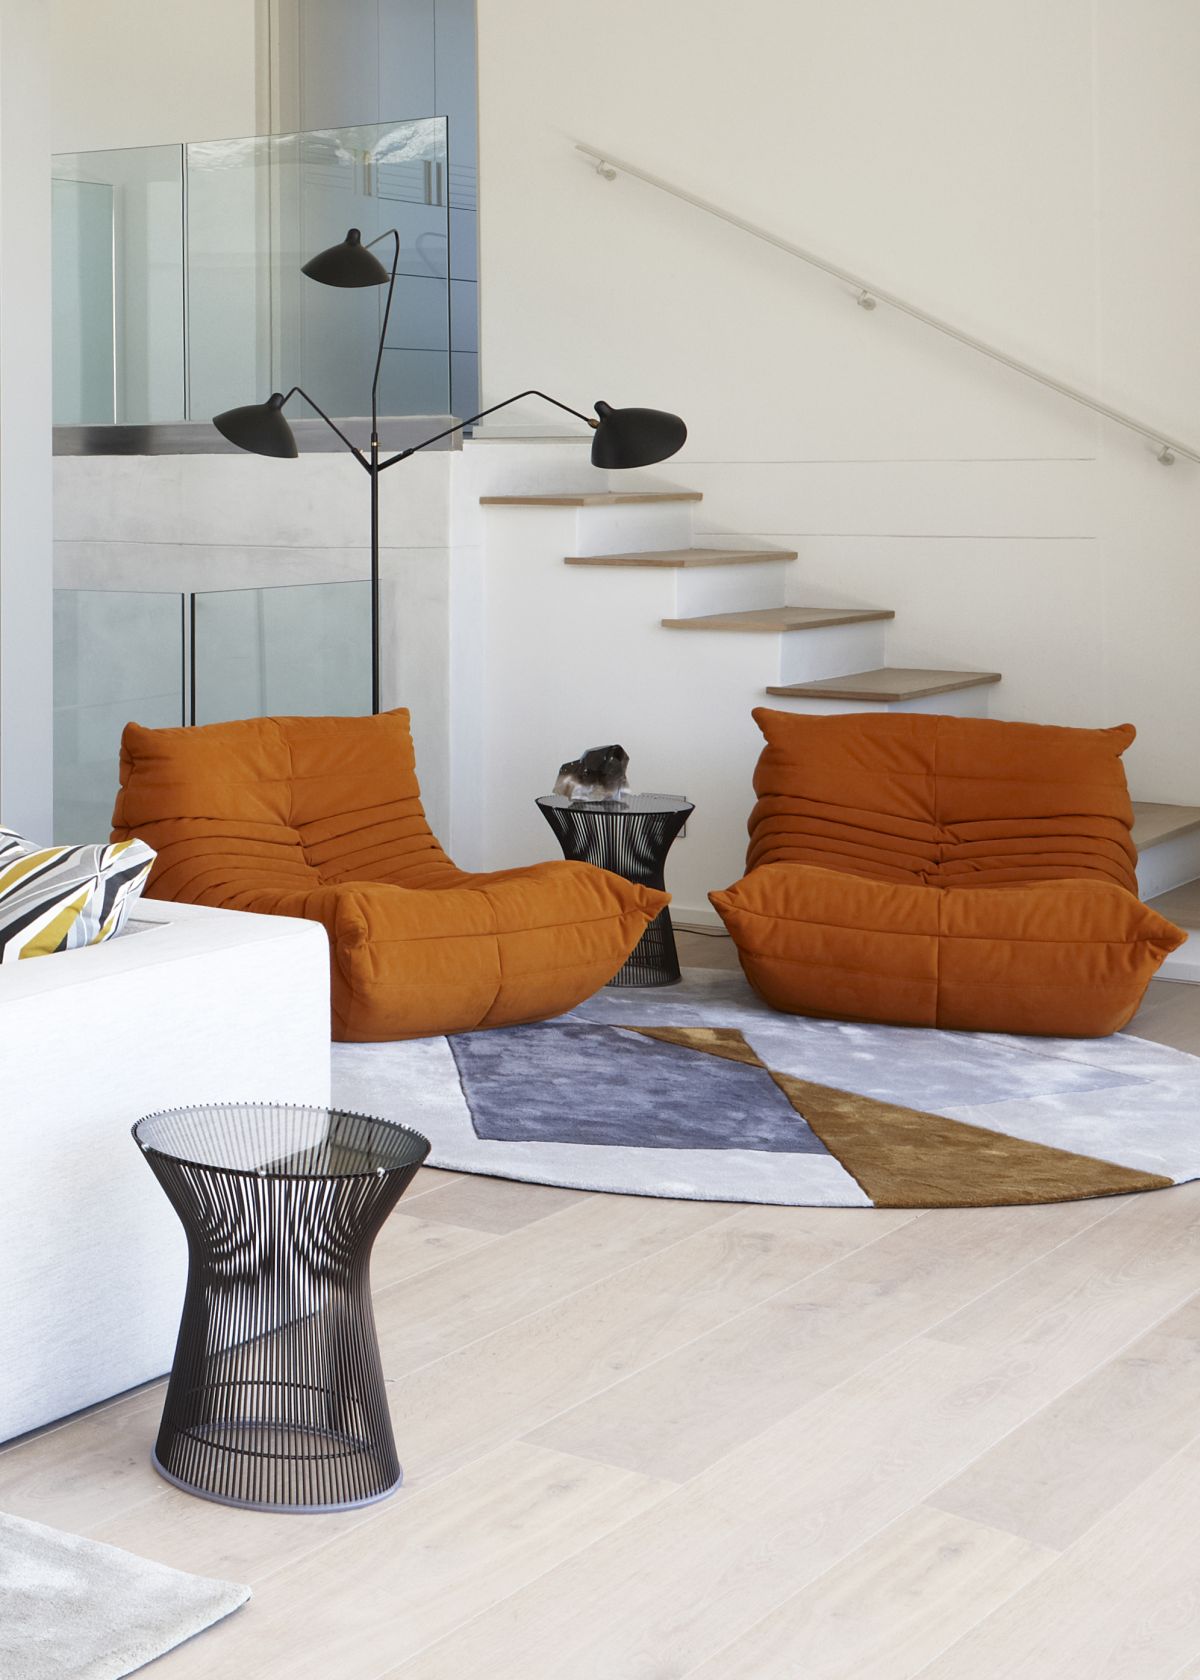 There are some bright and bold accents, and these orange chairs are among them